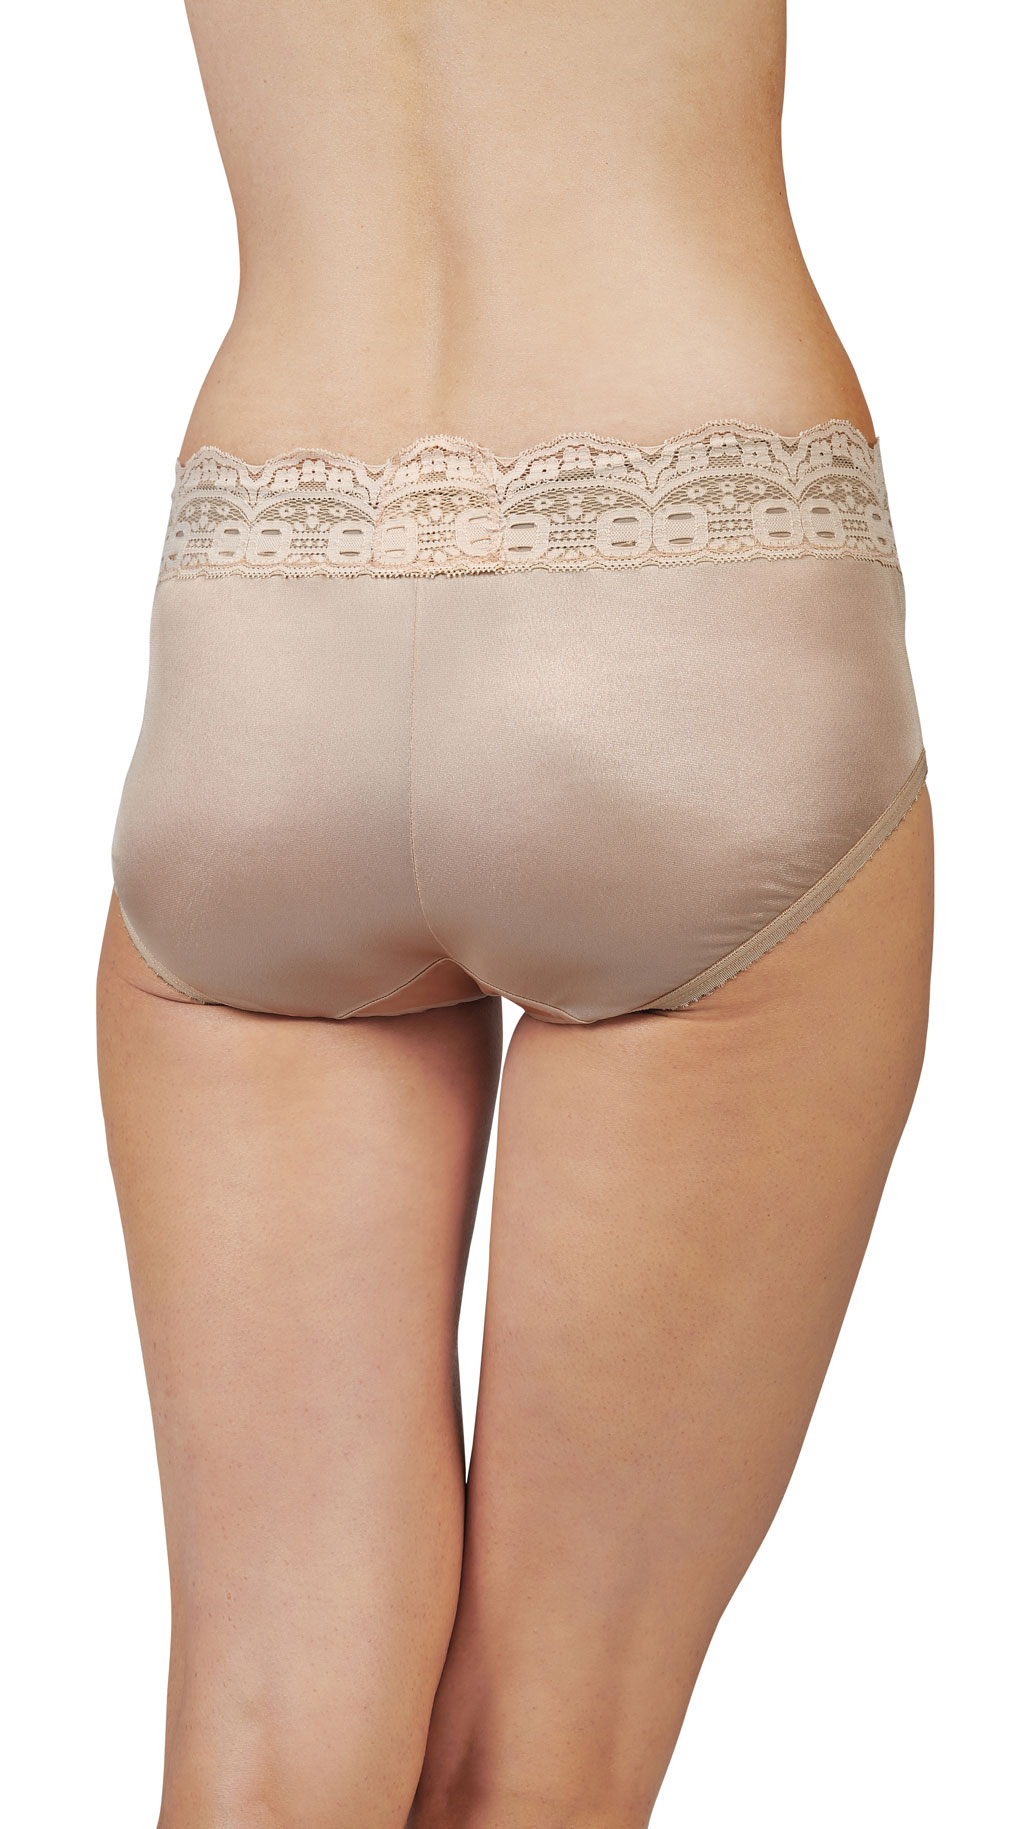 Pack of 3 thongs with lace trim - UNDERWEAR, PYJAMAS - Woman 